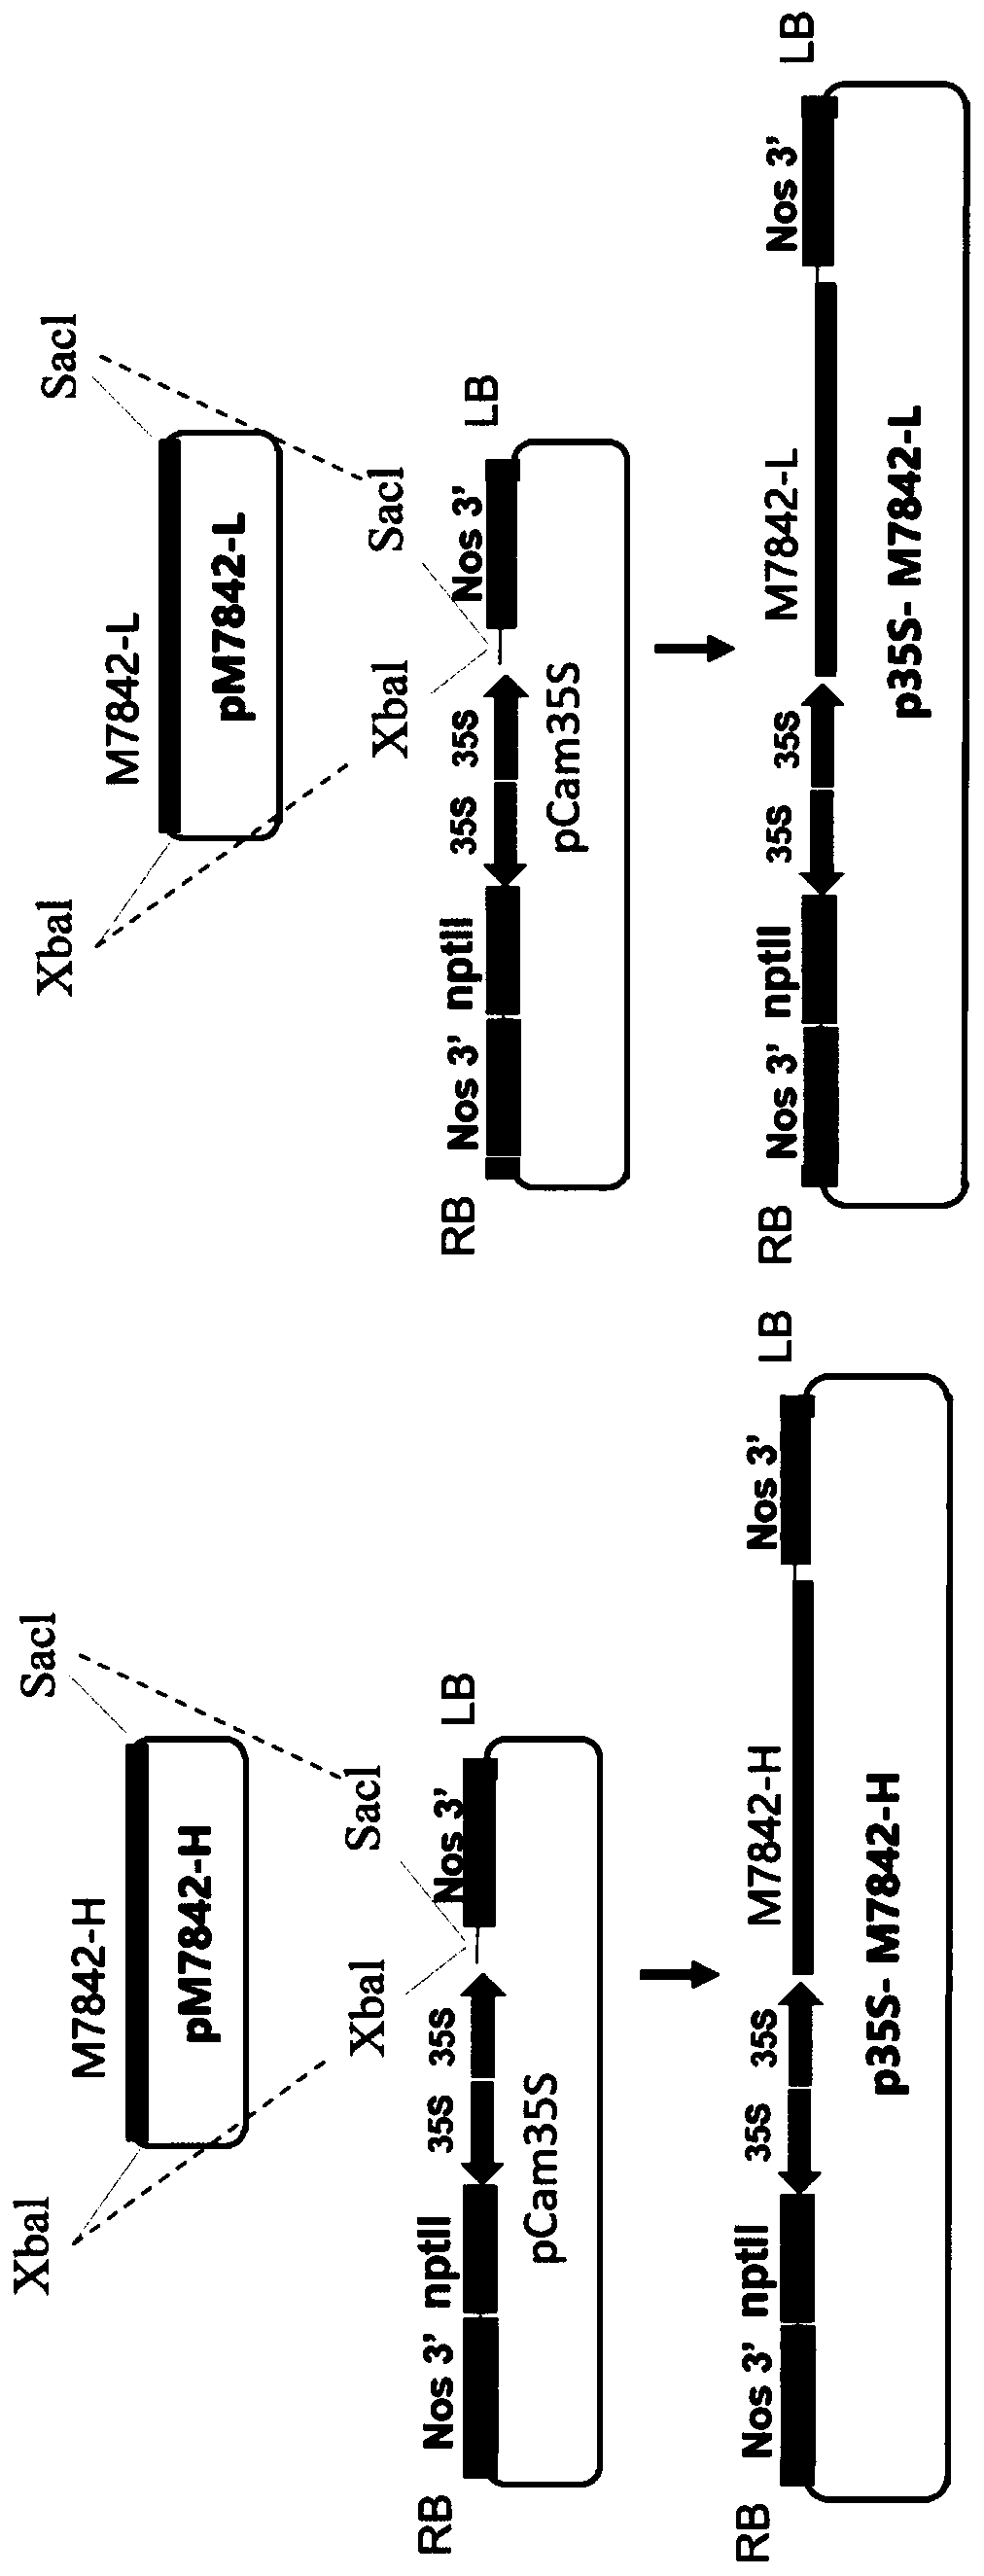 Application of plants as host in M7842 expression